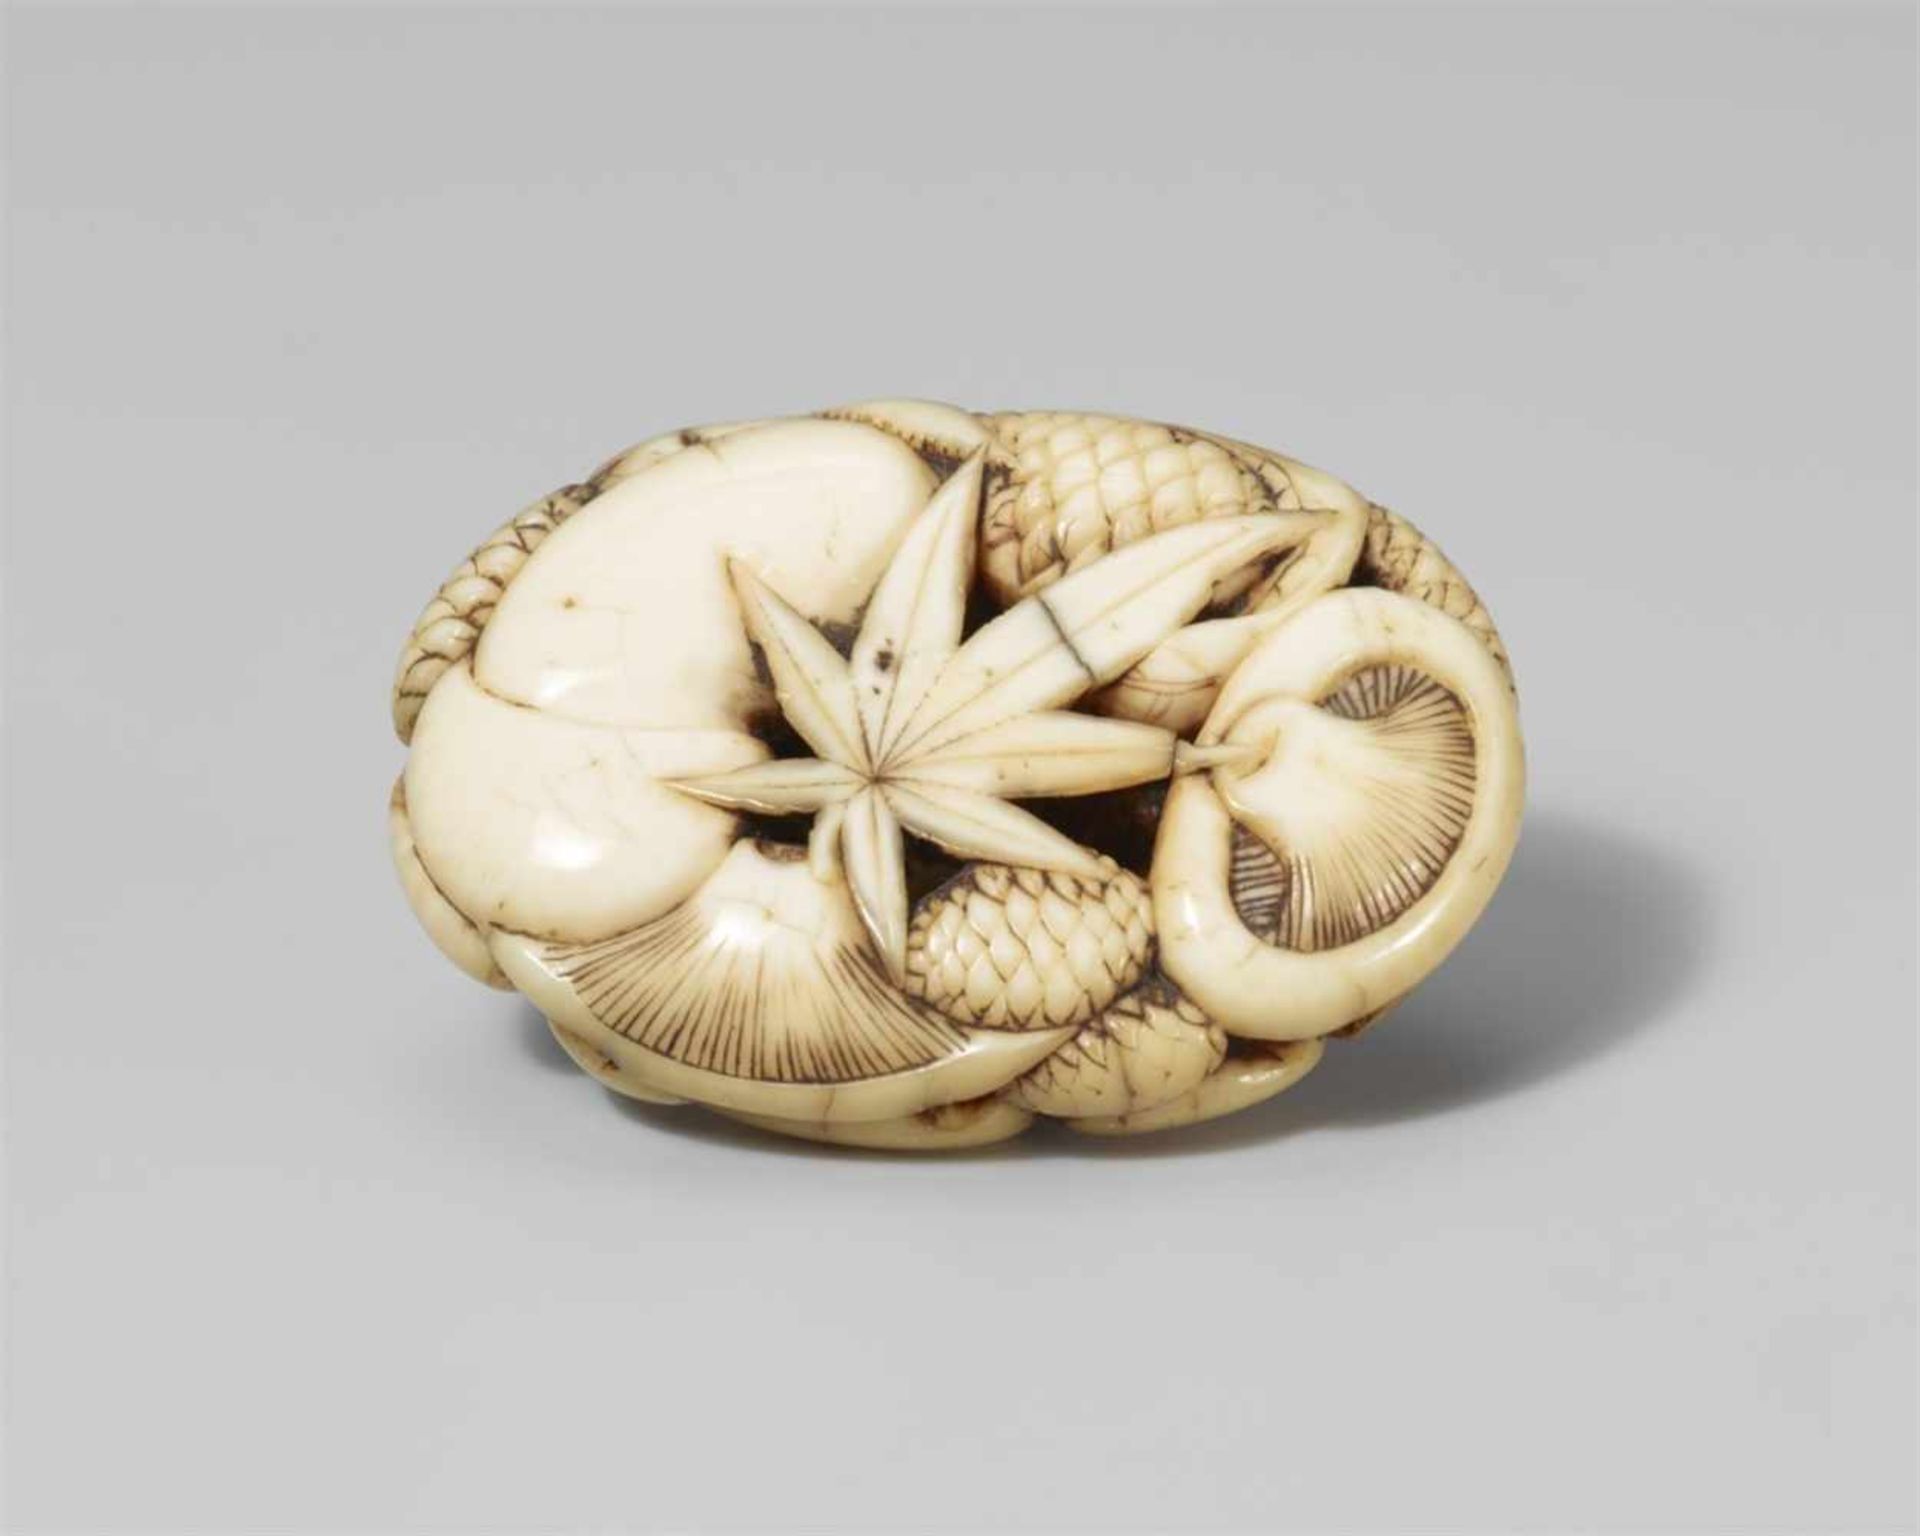 A flat oval ivory ryûsa manjû of mushrooms, pine cones and leaves. Mid-19th centuryCarved with an